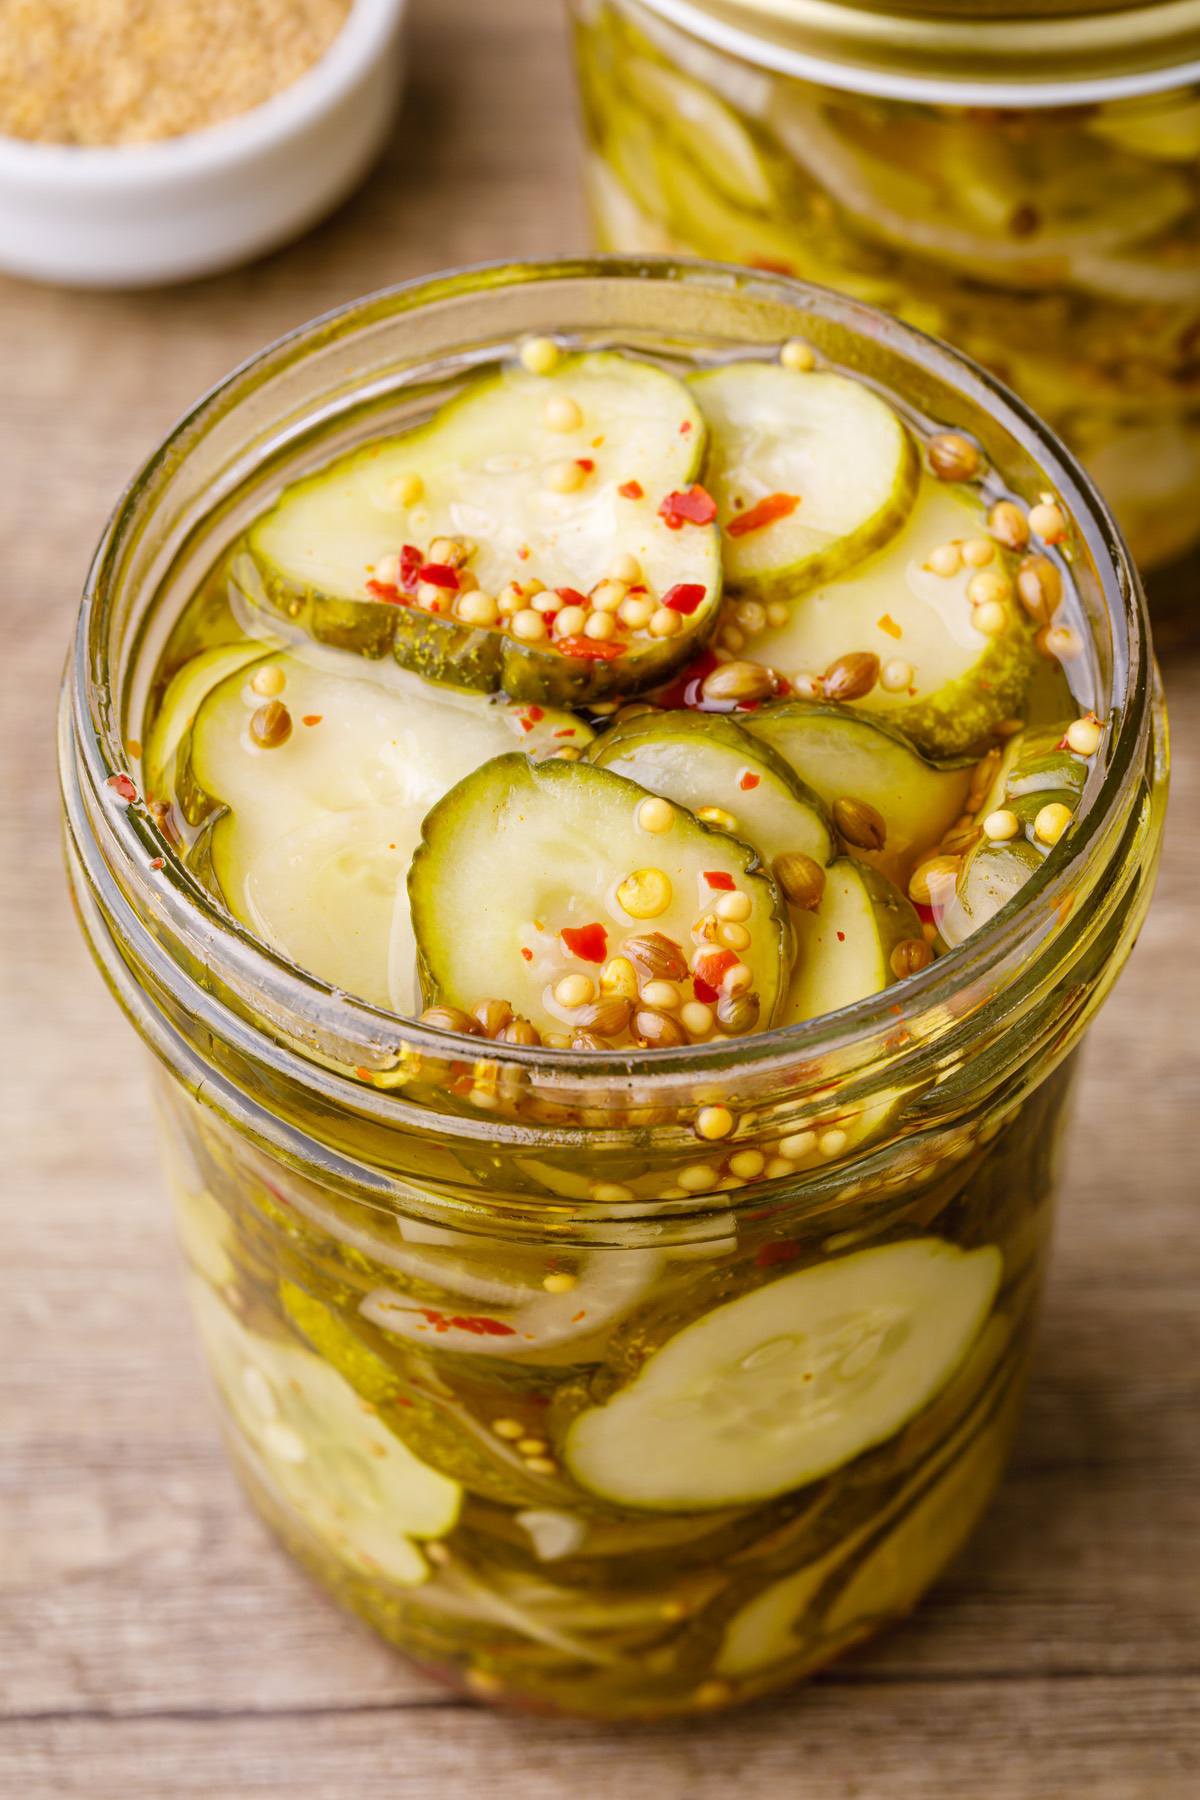 Bread And Butter Pickles